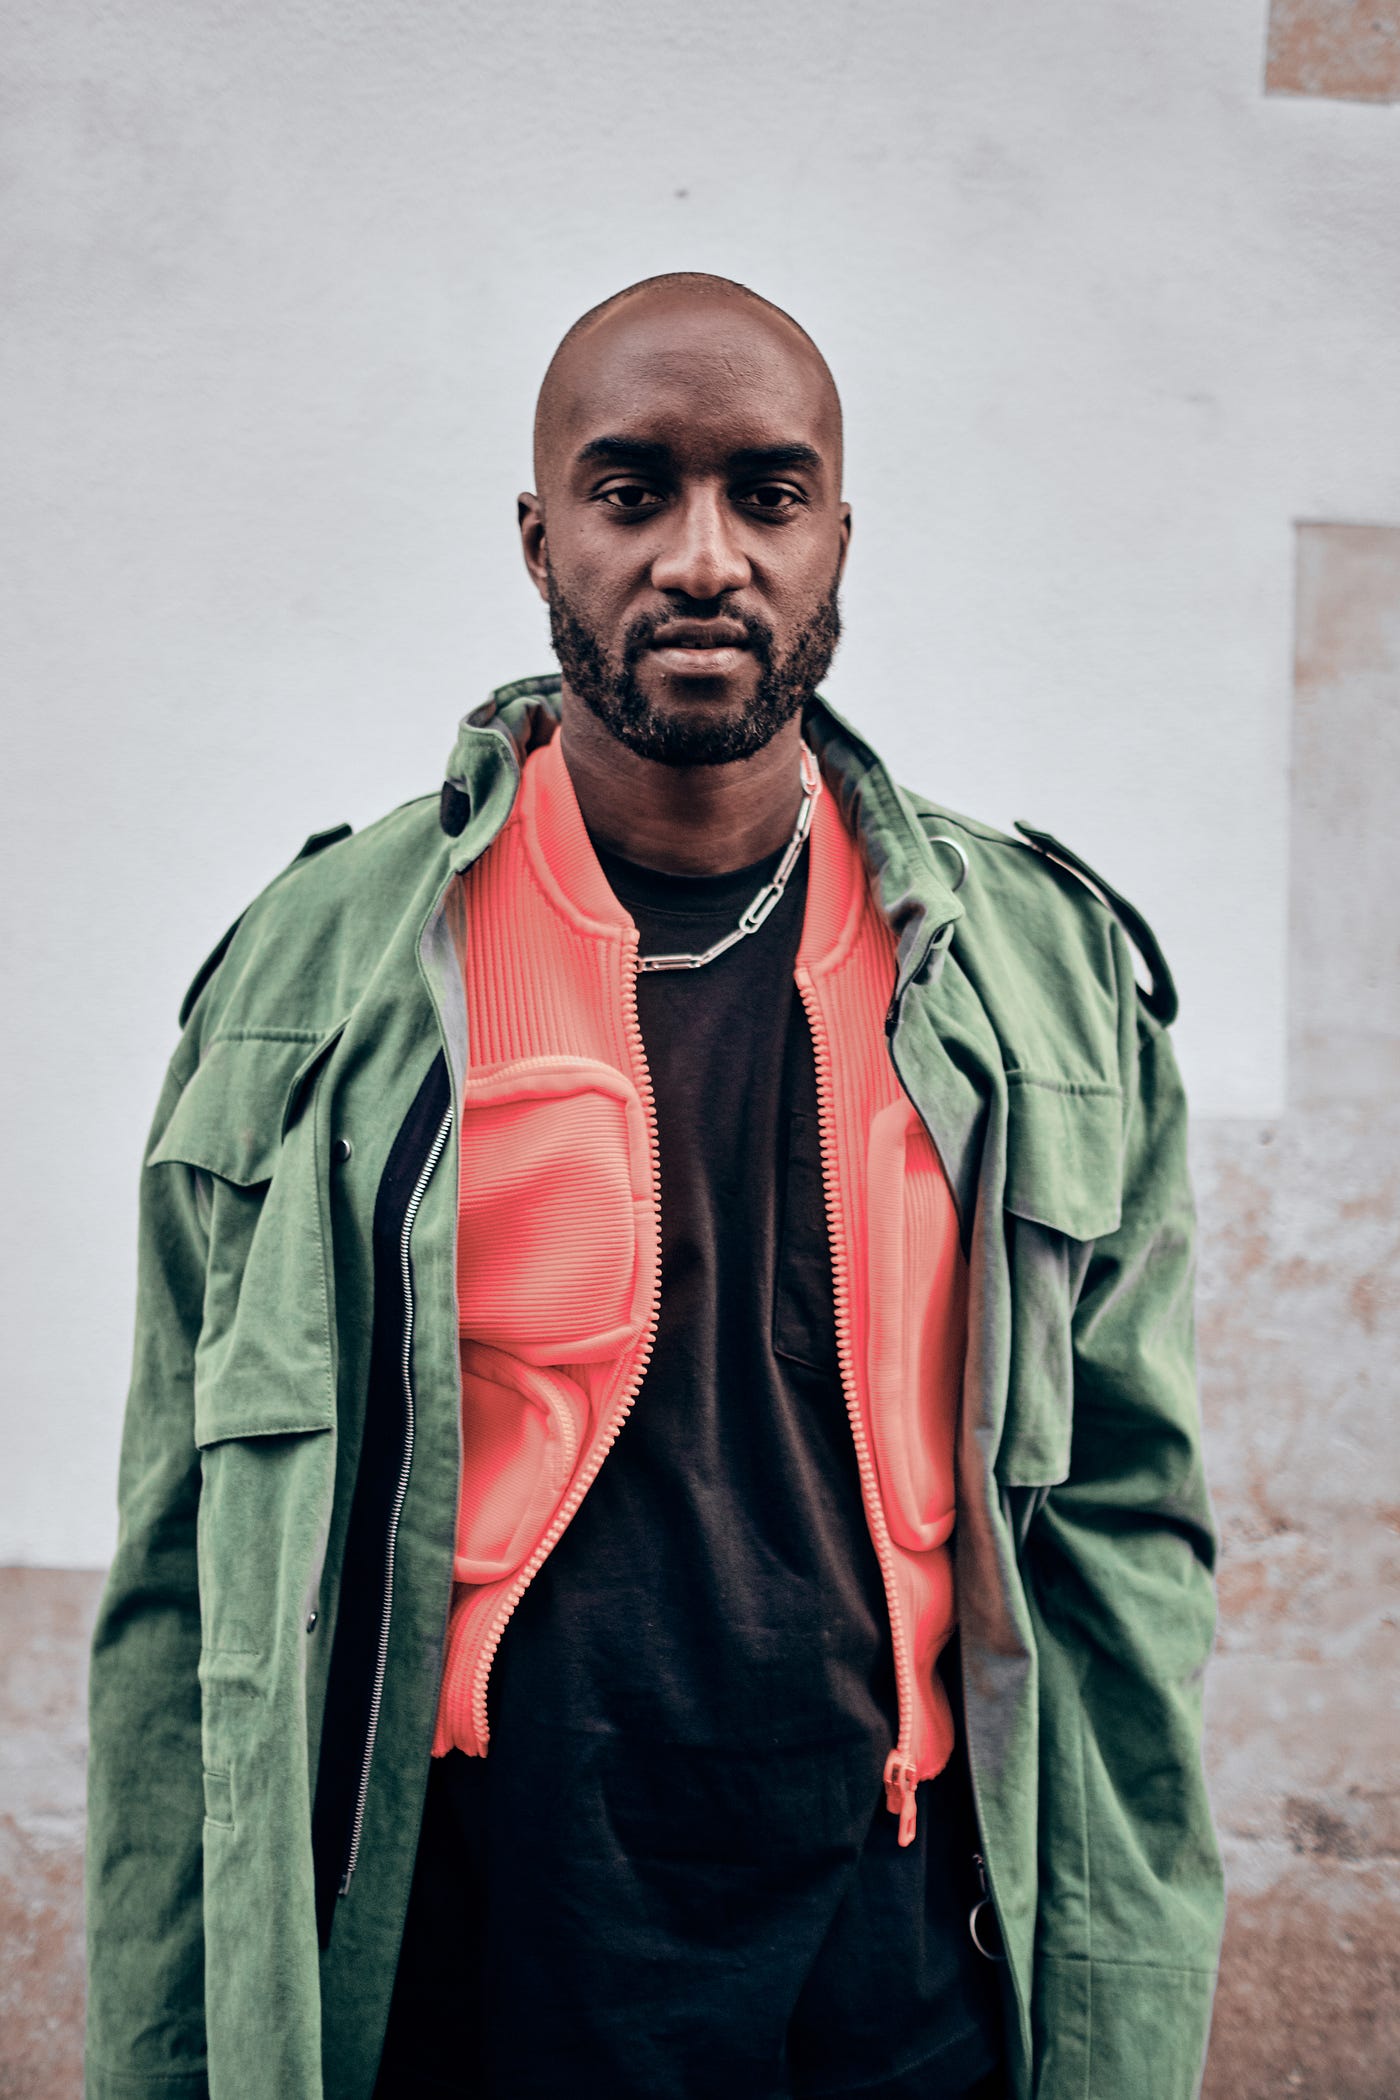 Virgil Abloh Net Worth: How Rich Is Off-White CEO?